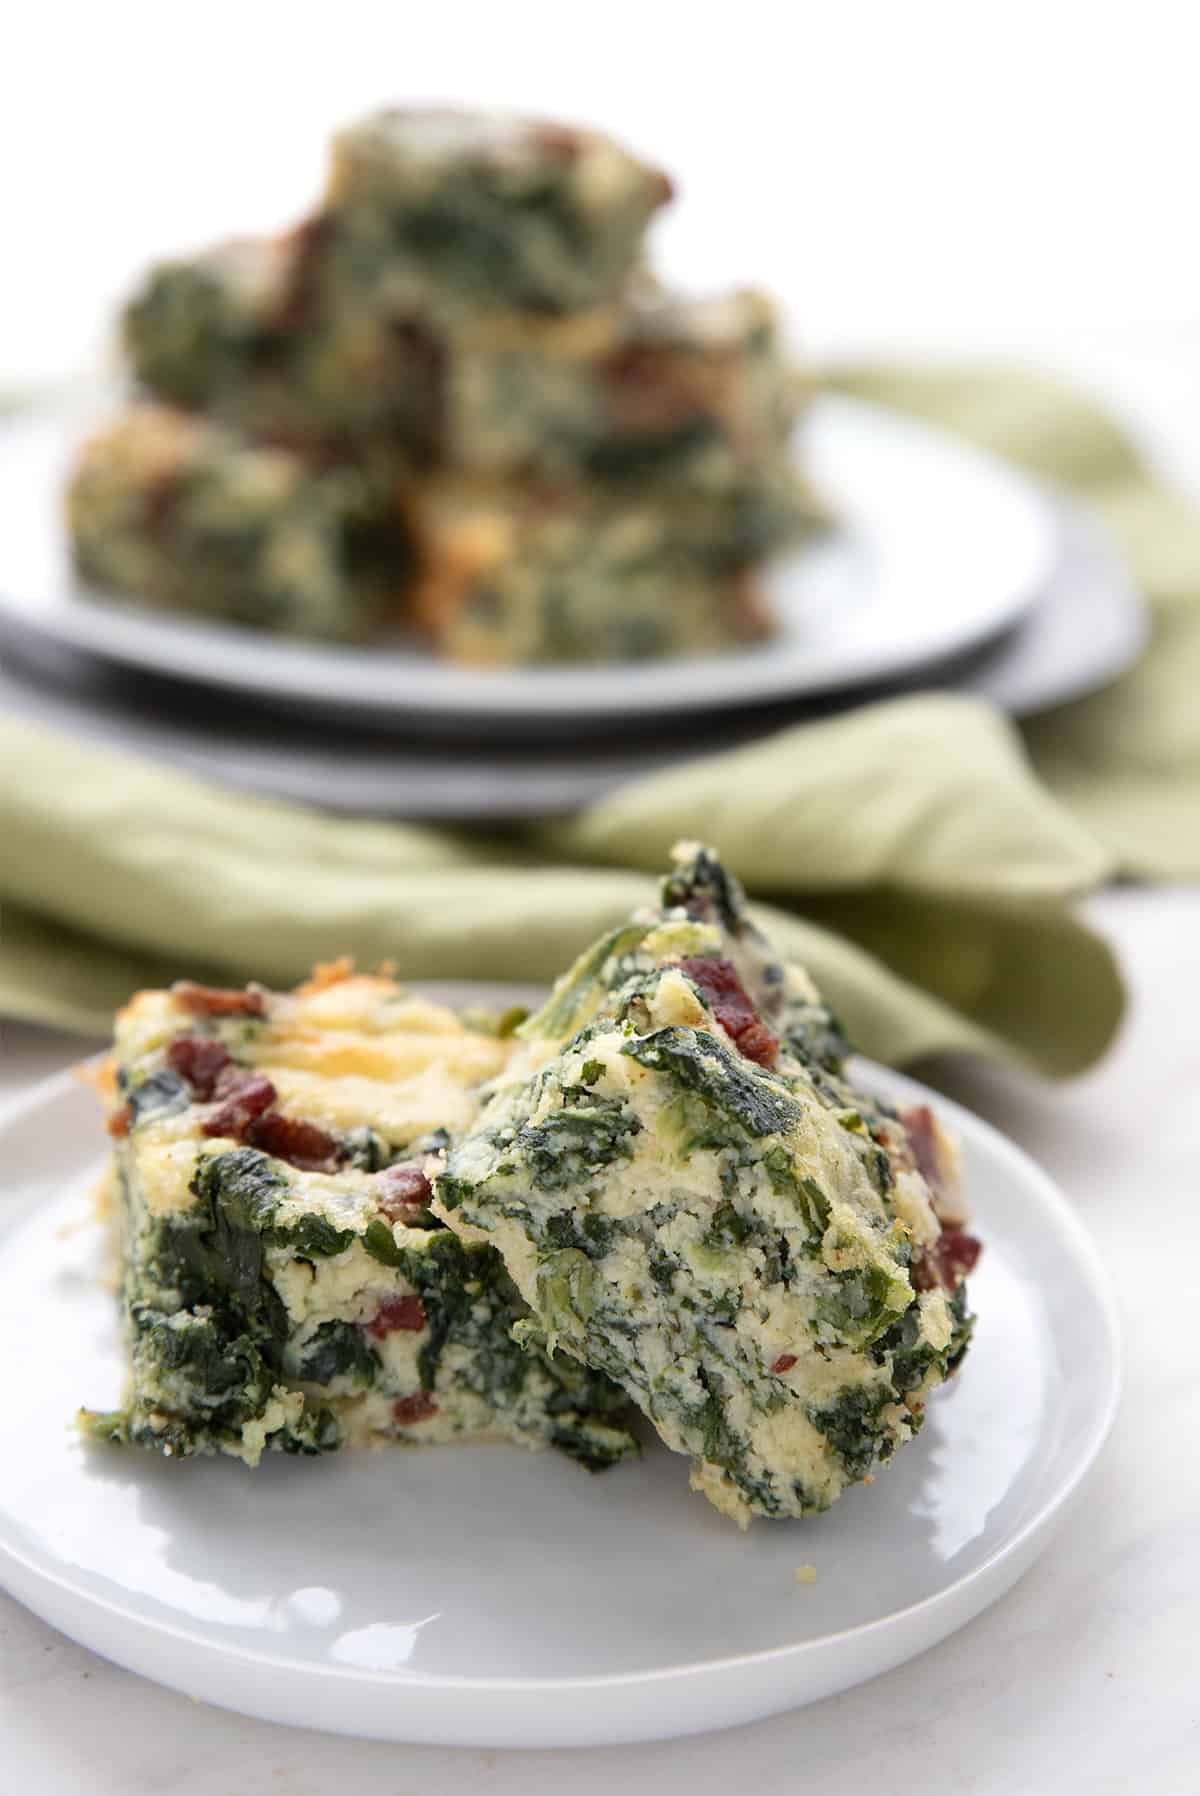 Two cheesy spinach squares on a white plate in front of a platter of more squares.